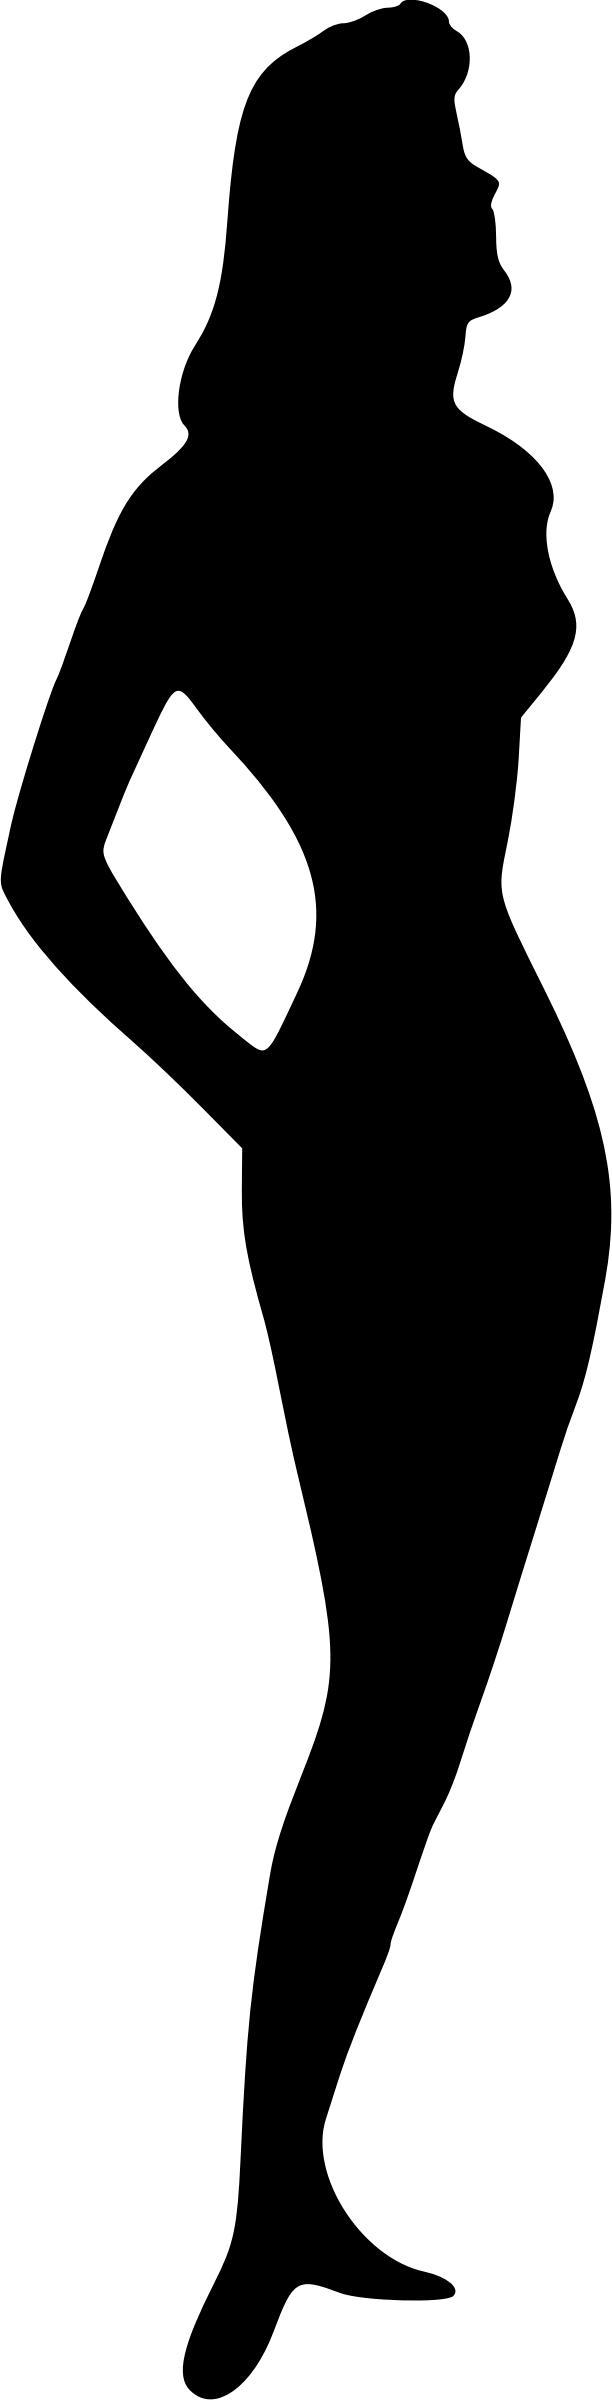 Woman silhouette 6 png transparent